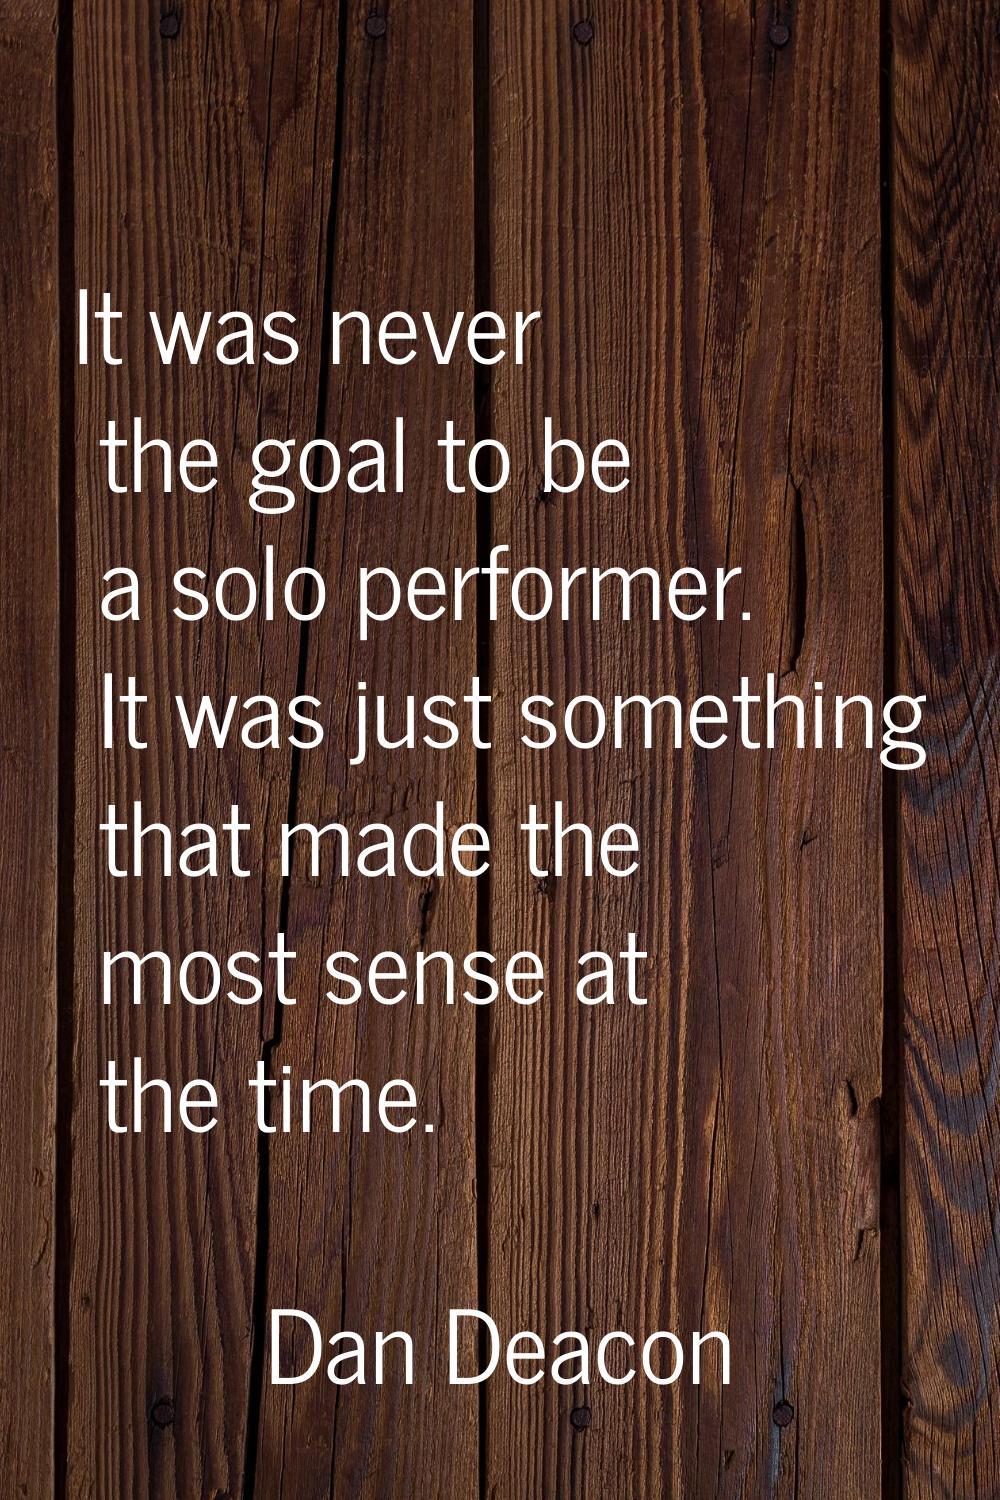 It was never the goal to be a solo performer. It was just something that made the most sense at the